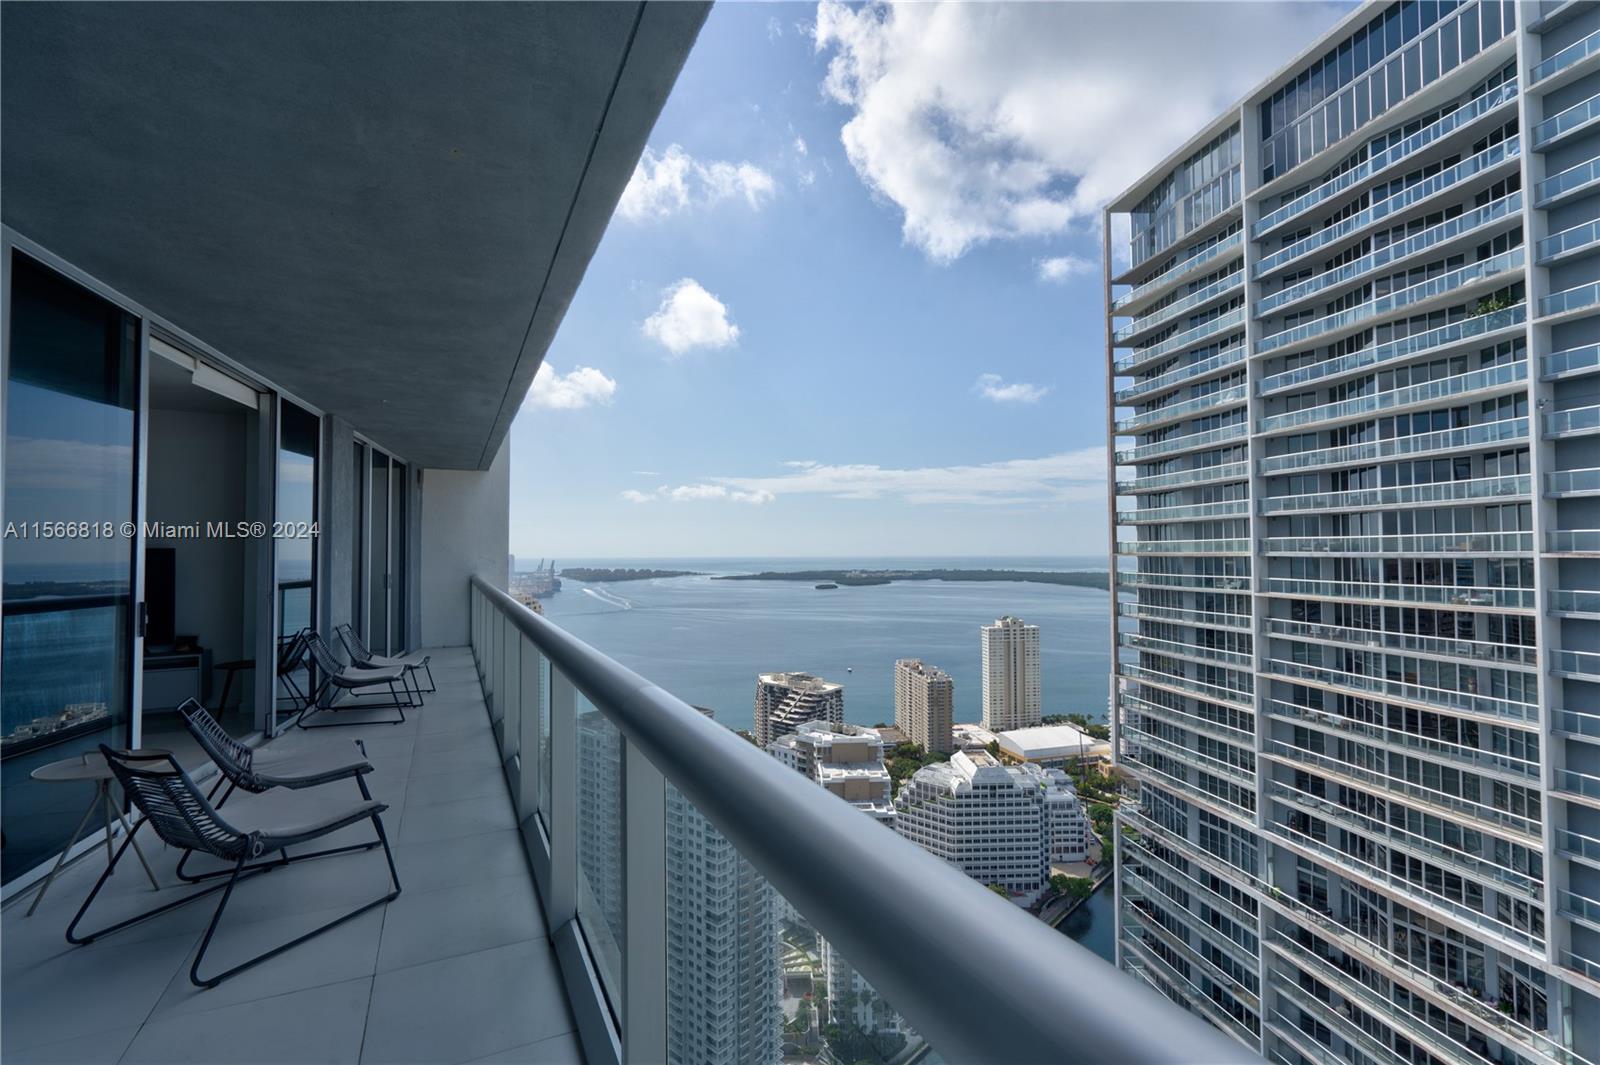 Stunning, spacious & Bright unit with Panoramic City, Bay & Pool Views. Finished to perfection with high impact and floor to ceiling windows, bathtub and spa in the master bathroom, walk-in closets and an expansive private balcony. Amazing 5Star Amenities including State of the Arts Fitness Center, SPA, Infinity Pool, Restaurants, Movie Theater. Walking Distance to Brickell City Center, Shopping and Miami Financial District. FULLY FURNISHED!!!